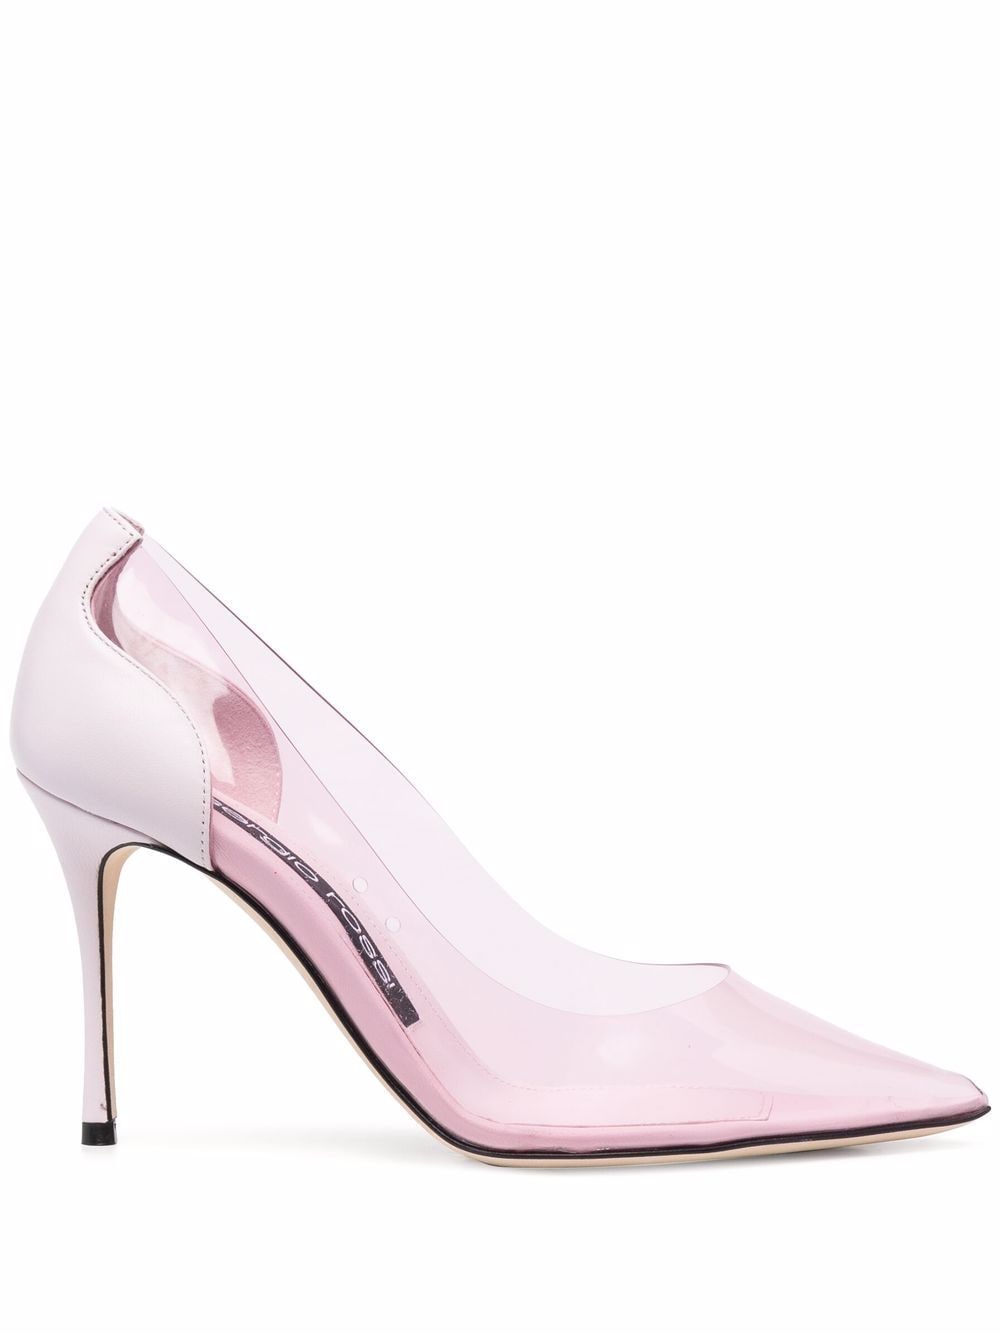 Image 1 of Sergio Rossi SR1 pointed pumps